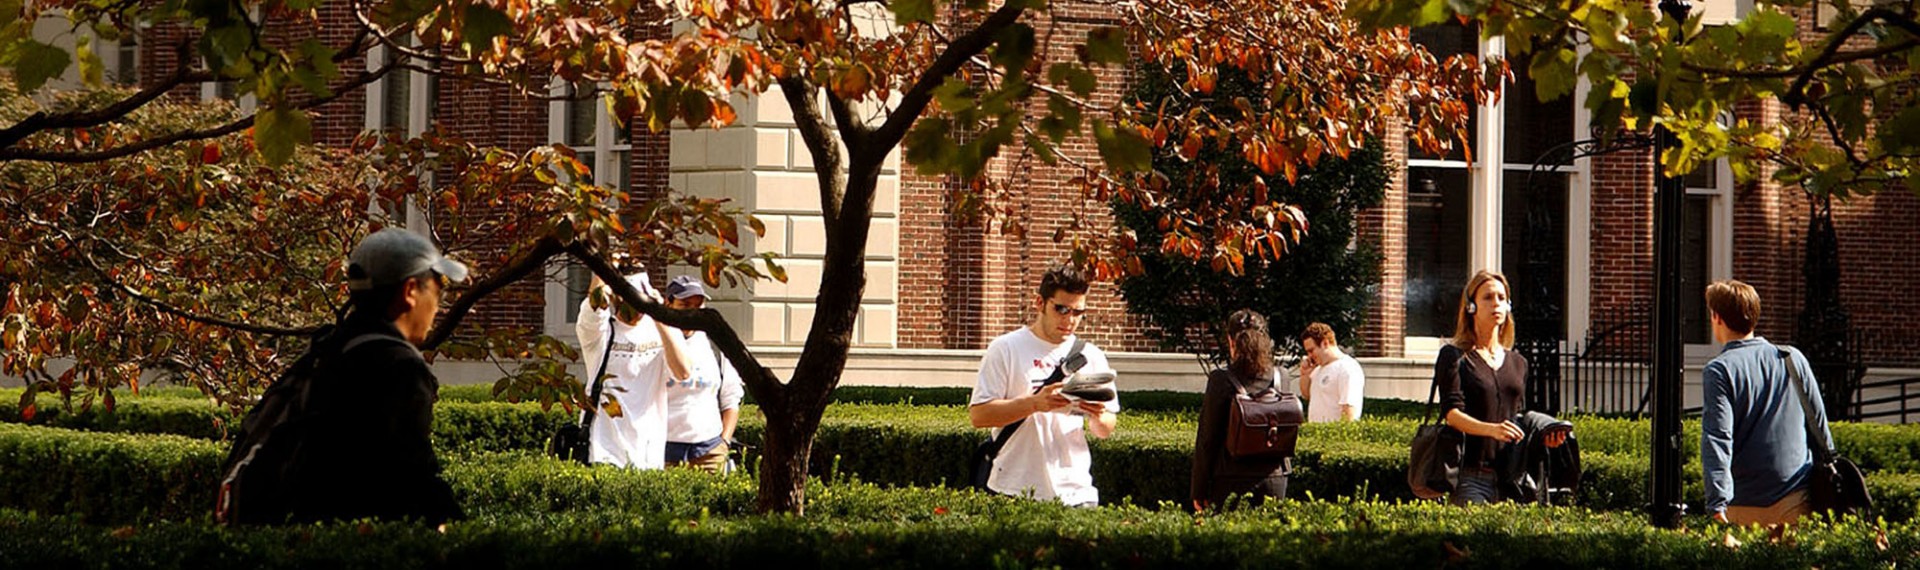 Students walk on campus along hedge-lined cobblestone paths